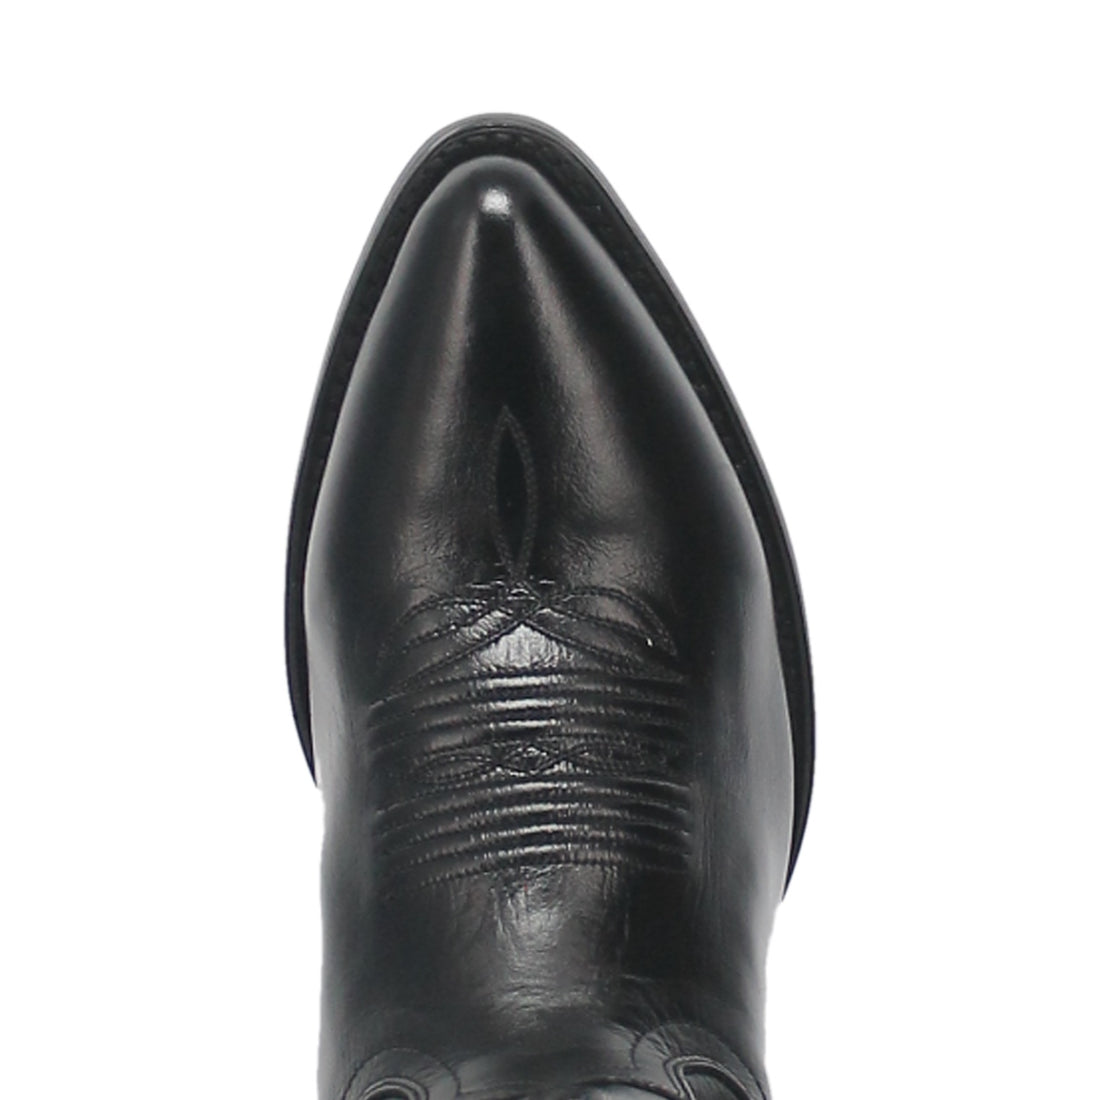 MILWAUKEE LEATHER BOOT J TOE Preview #6